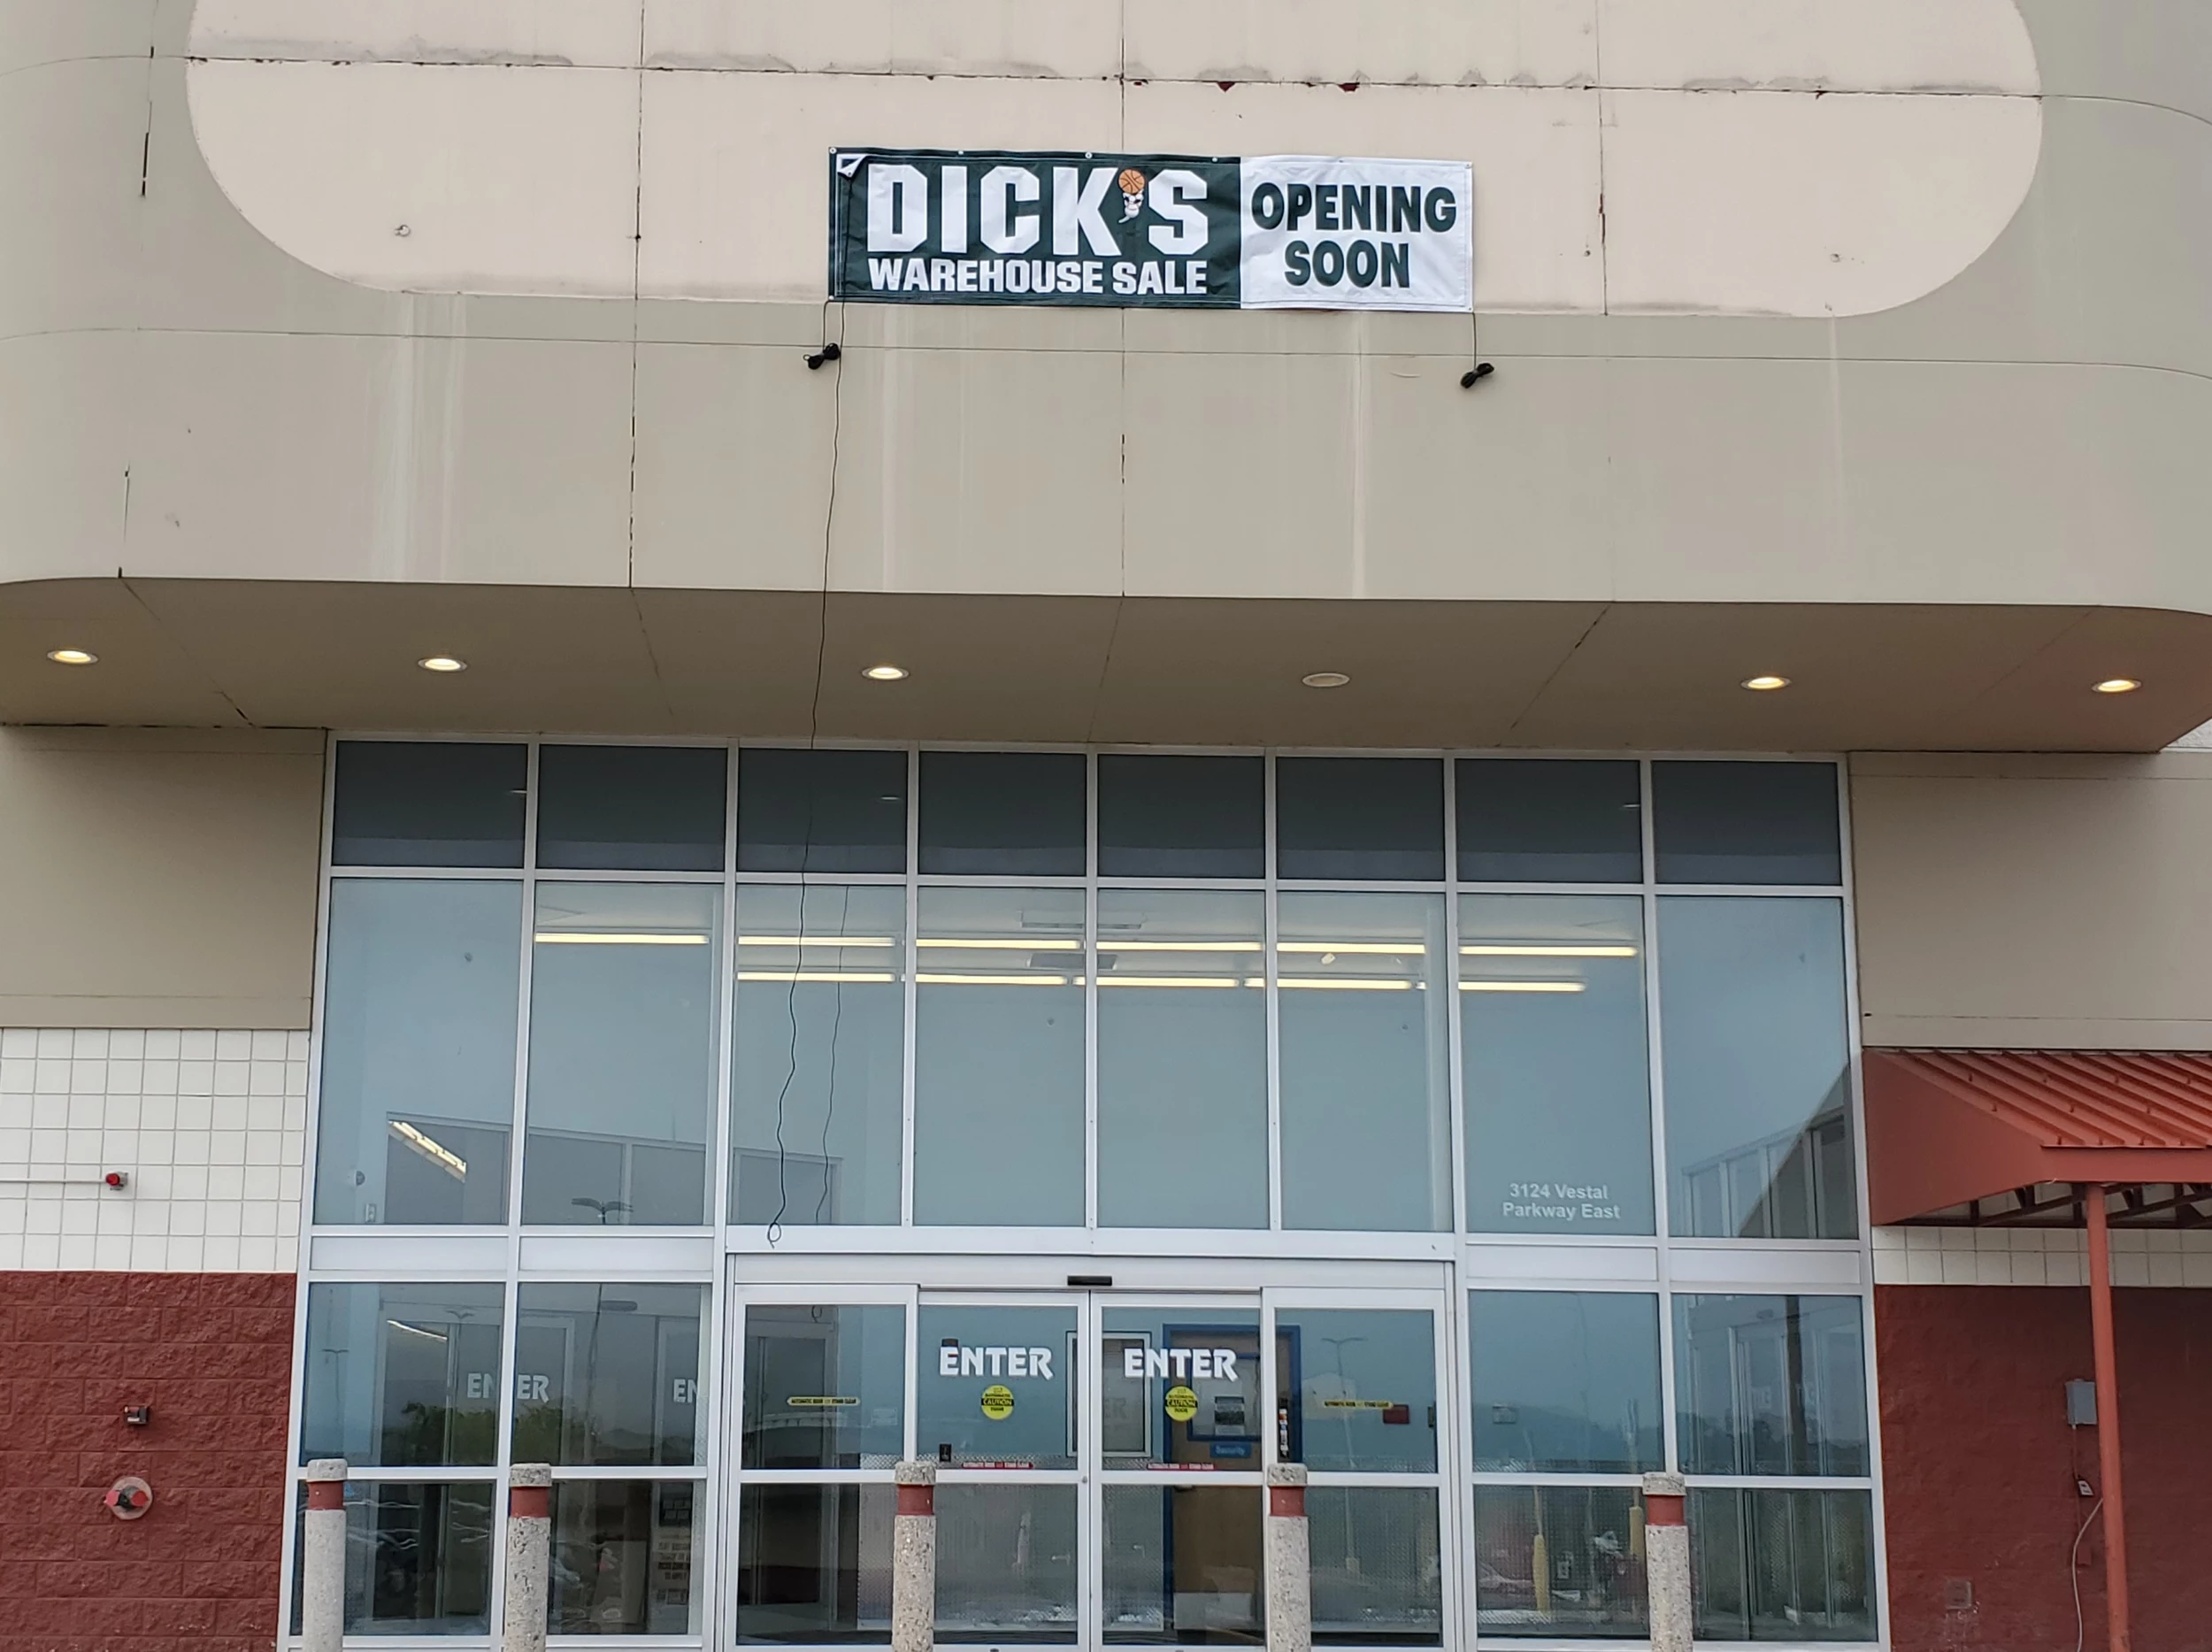 New Dicks Sporting Goods Warehouse Sale Store Opening in Vestal photo